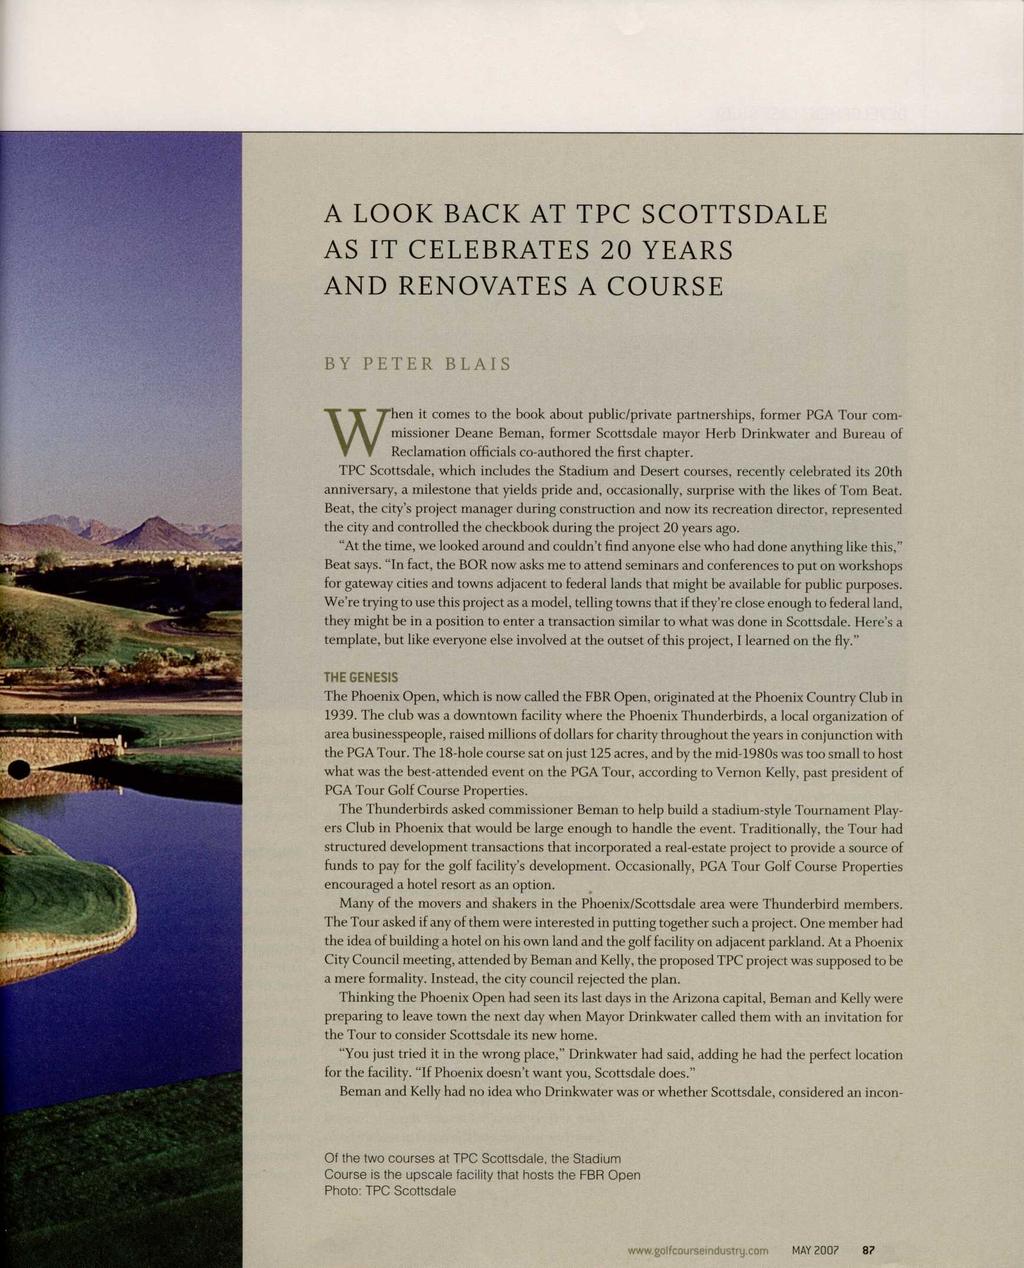 A LOOK BACK AT TPC SCOTTSDALE AS IT CELEBRATES 20 YEARS AND RENOVATES A COURSE BY PETER BLAIS When it comes to the book about public/private partnerships, former PGA Tour commissioner Deane Beman,